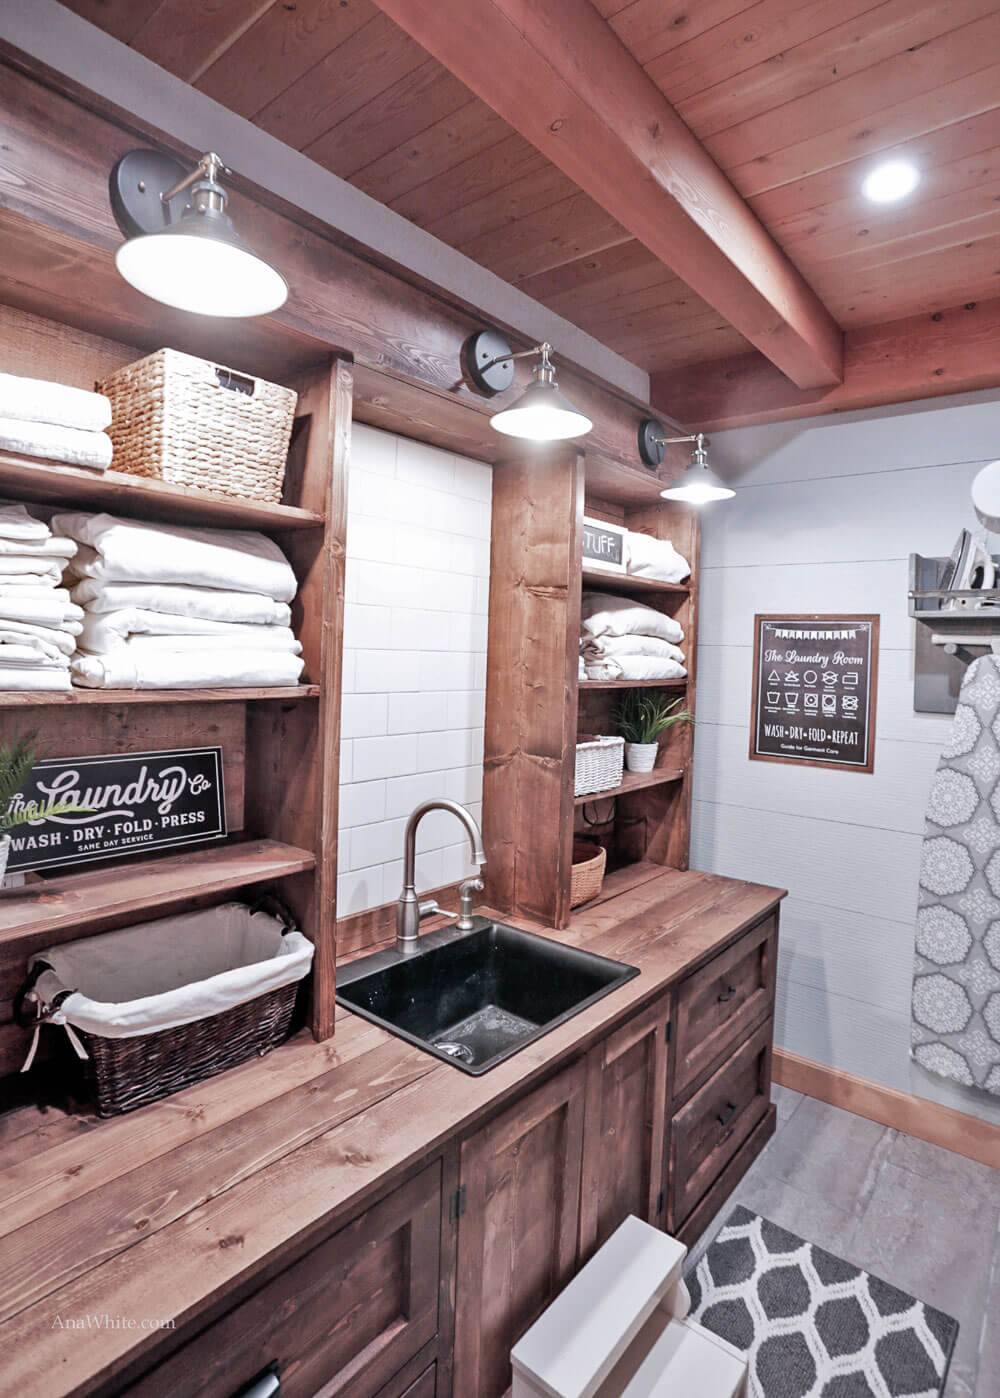 wood wall plank ceiling laundry room hanging barn light wash sink folded towels in cupboard